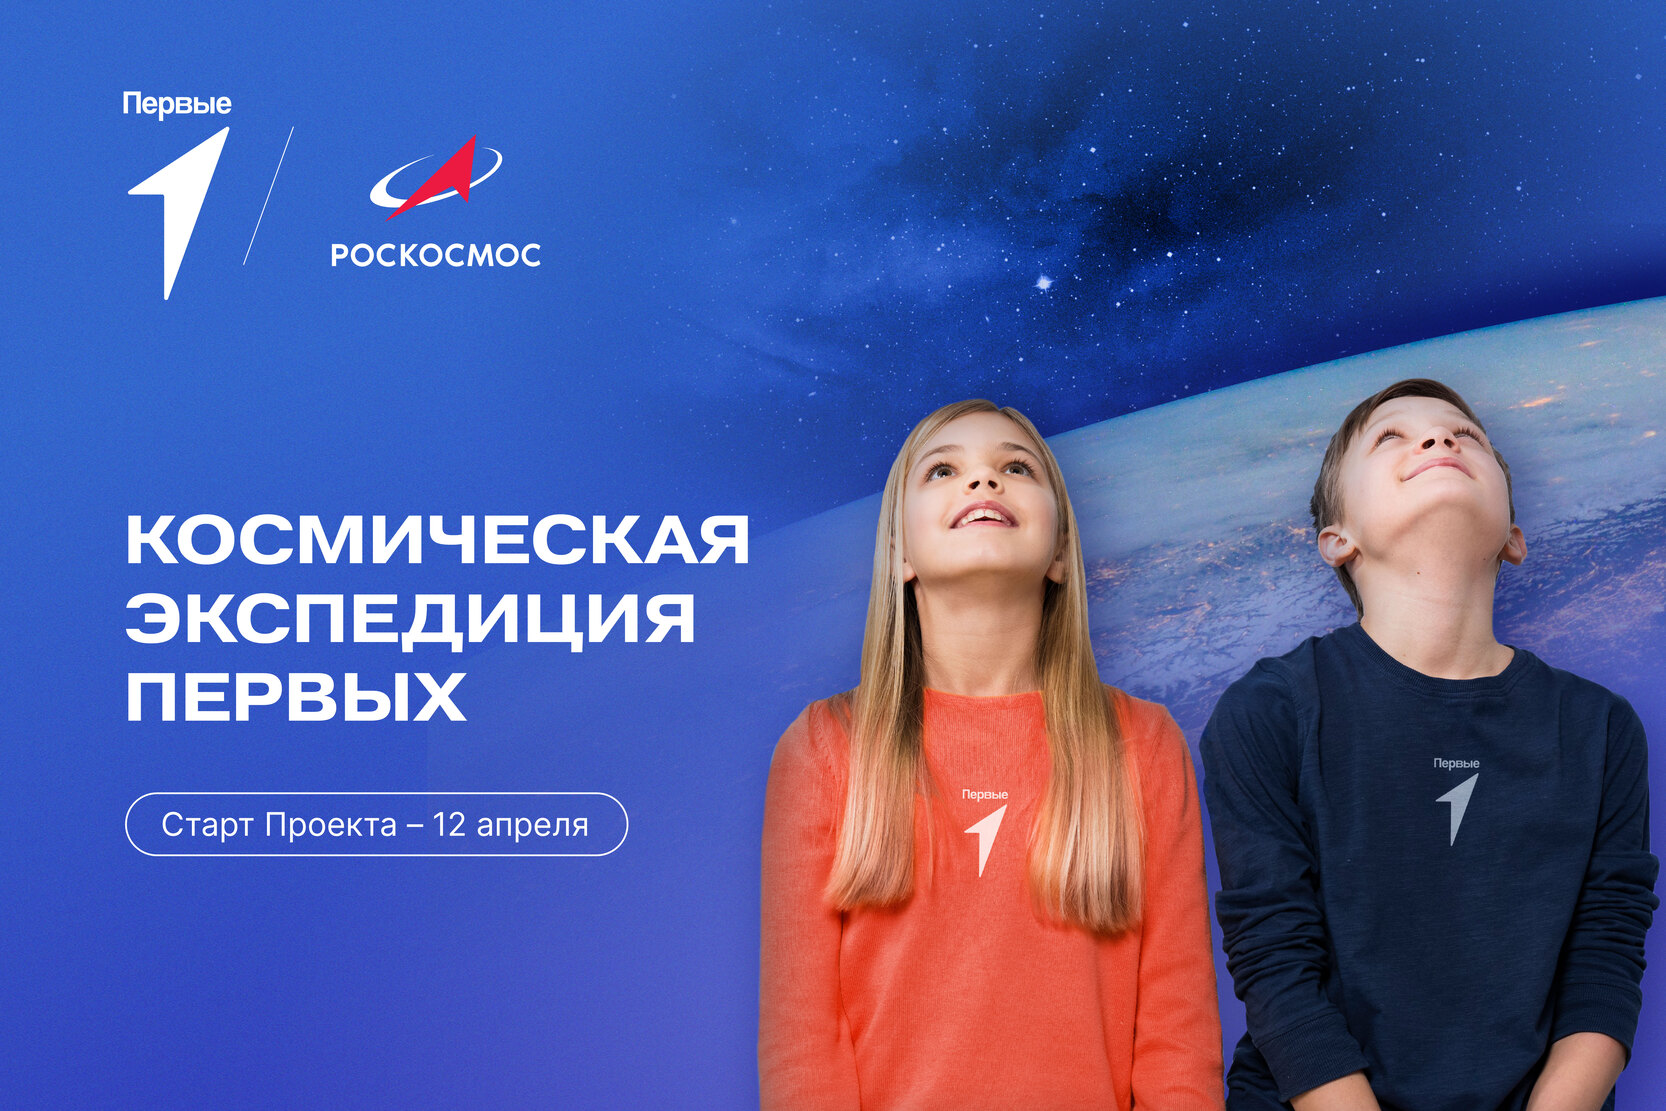 An all-Russian project "Space Expedition of the First"